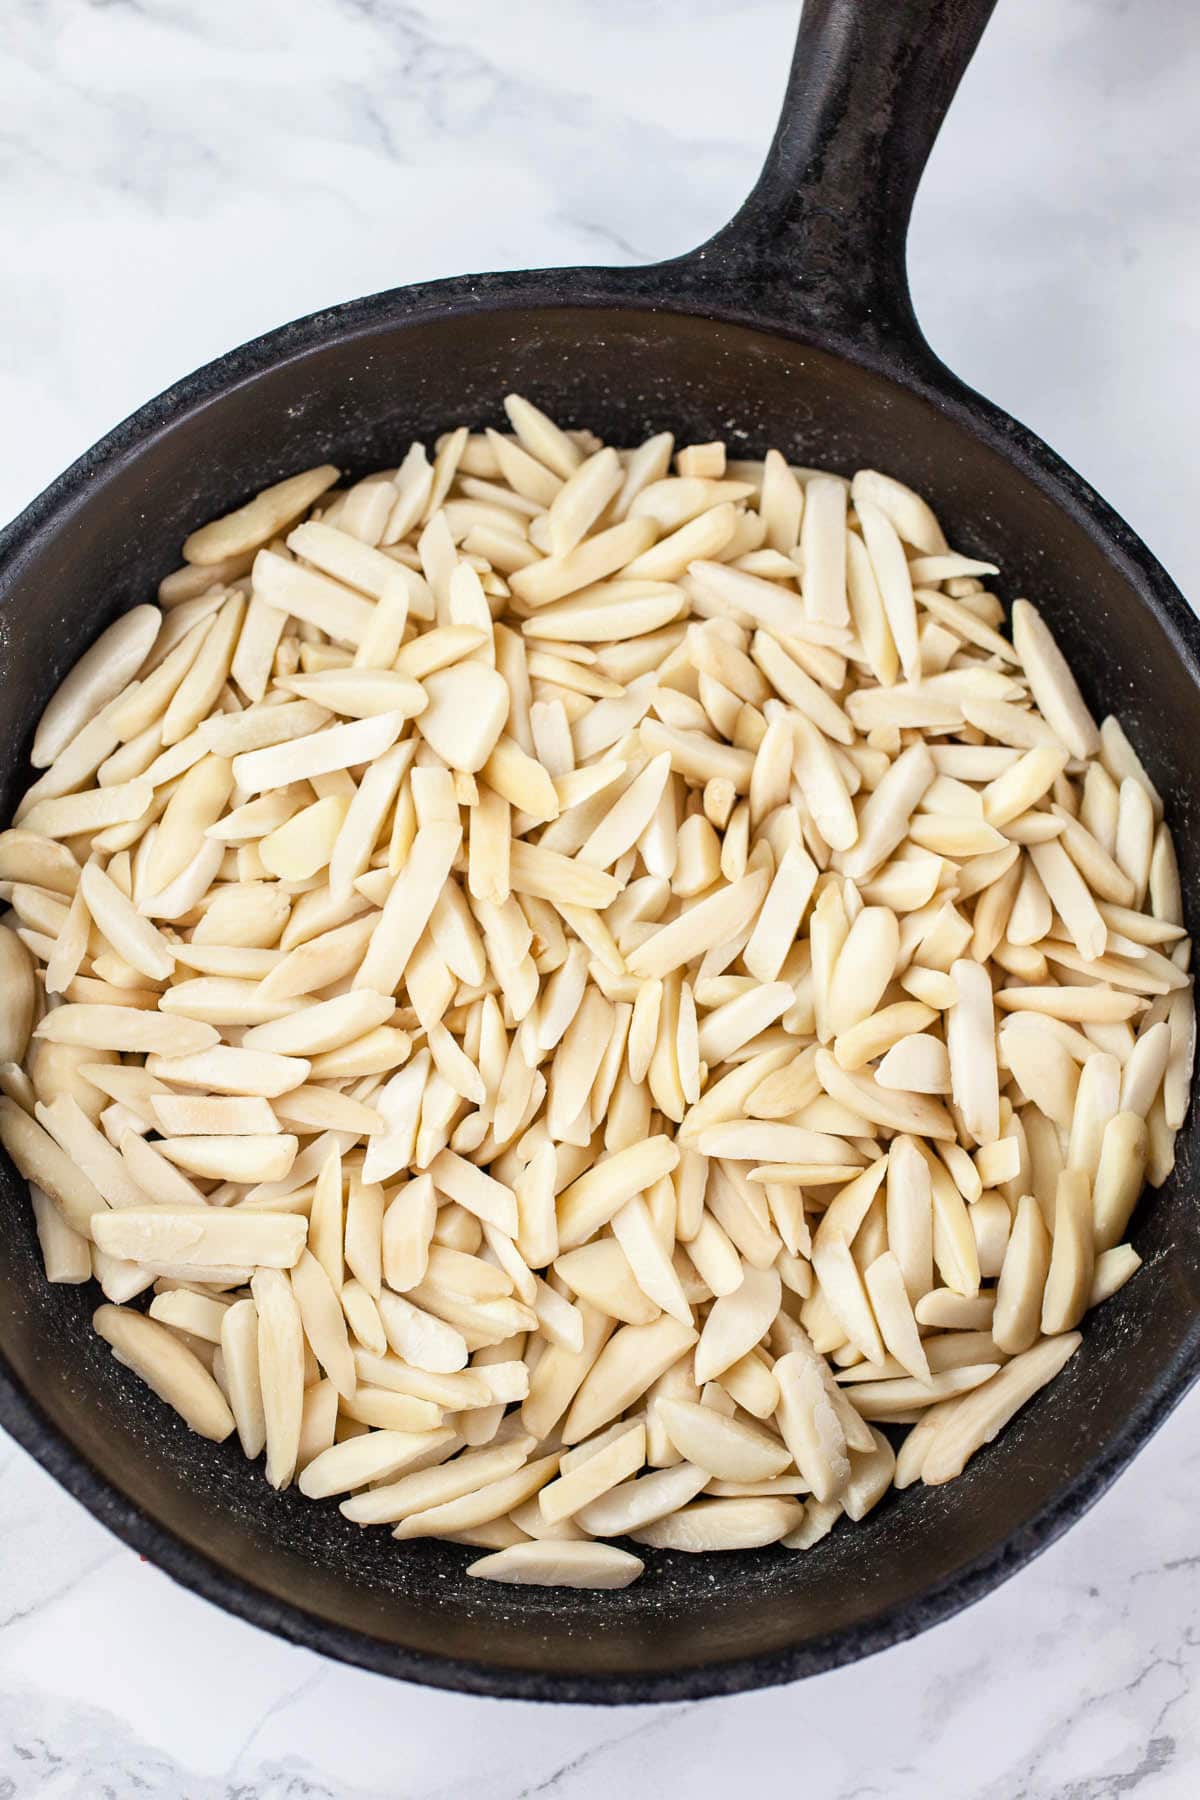 Sliced almonds toasted in small cast iron skillet.